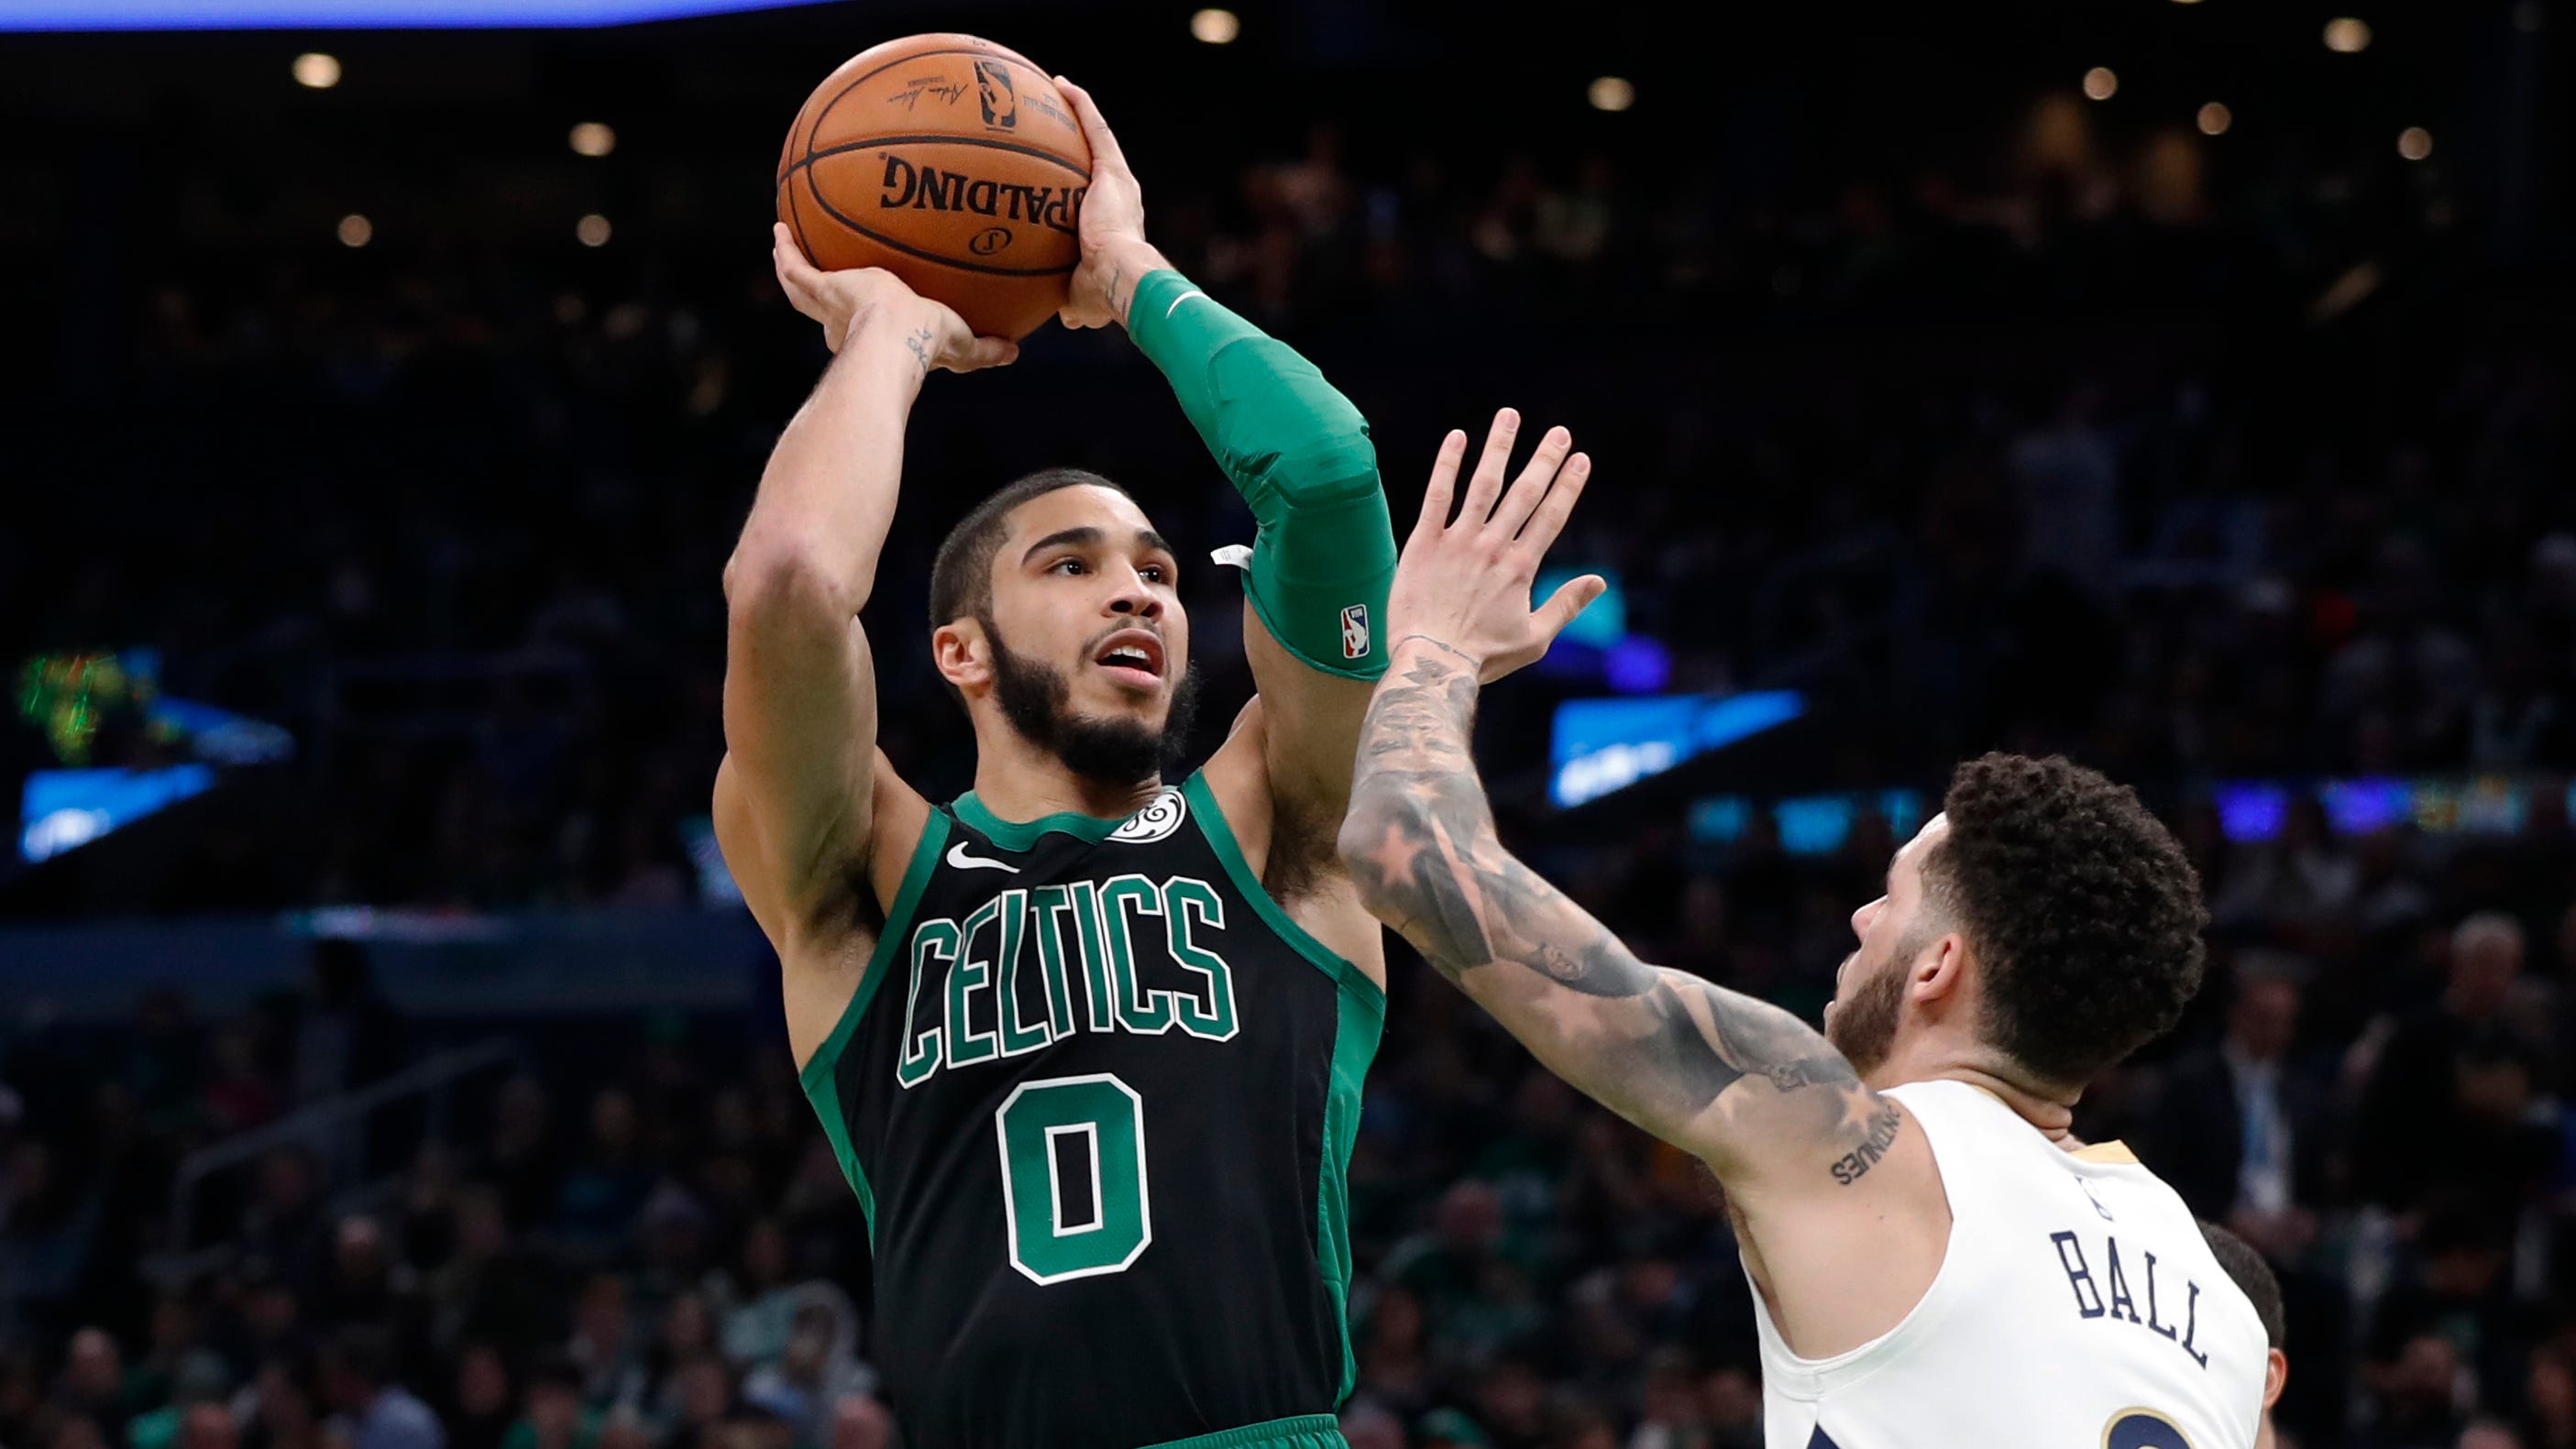 Jayson Tatum pours in career-high 41 points in Celtics win